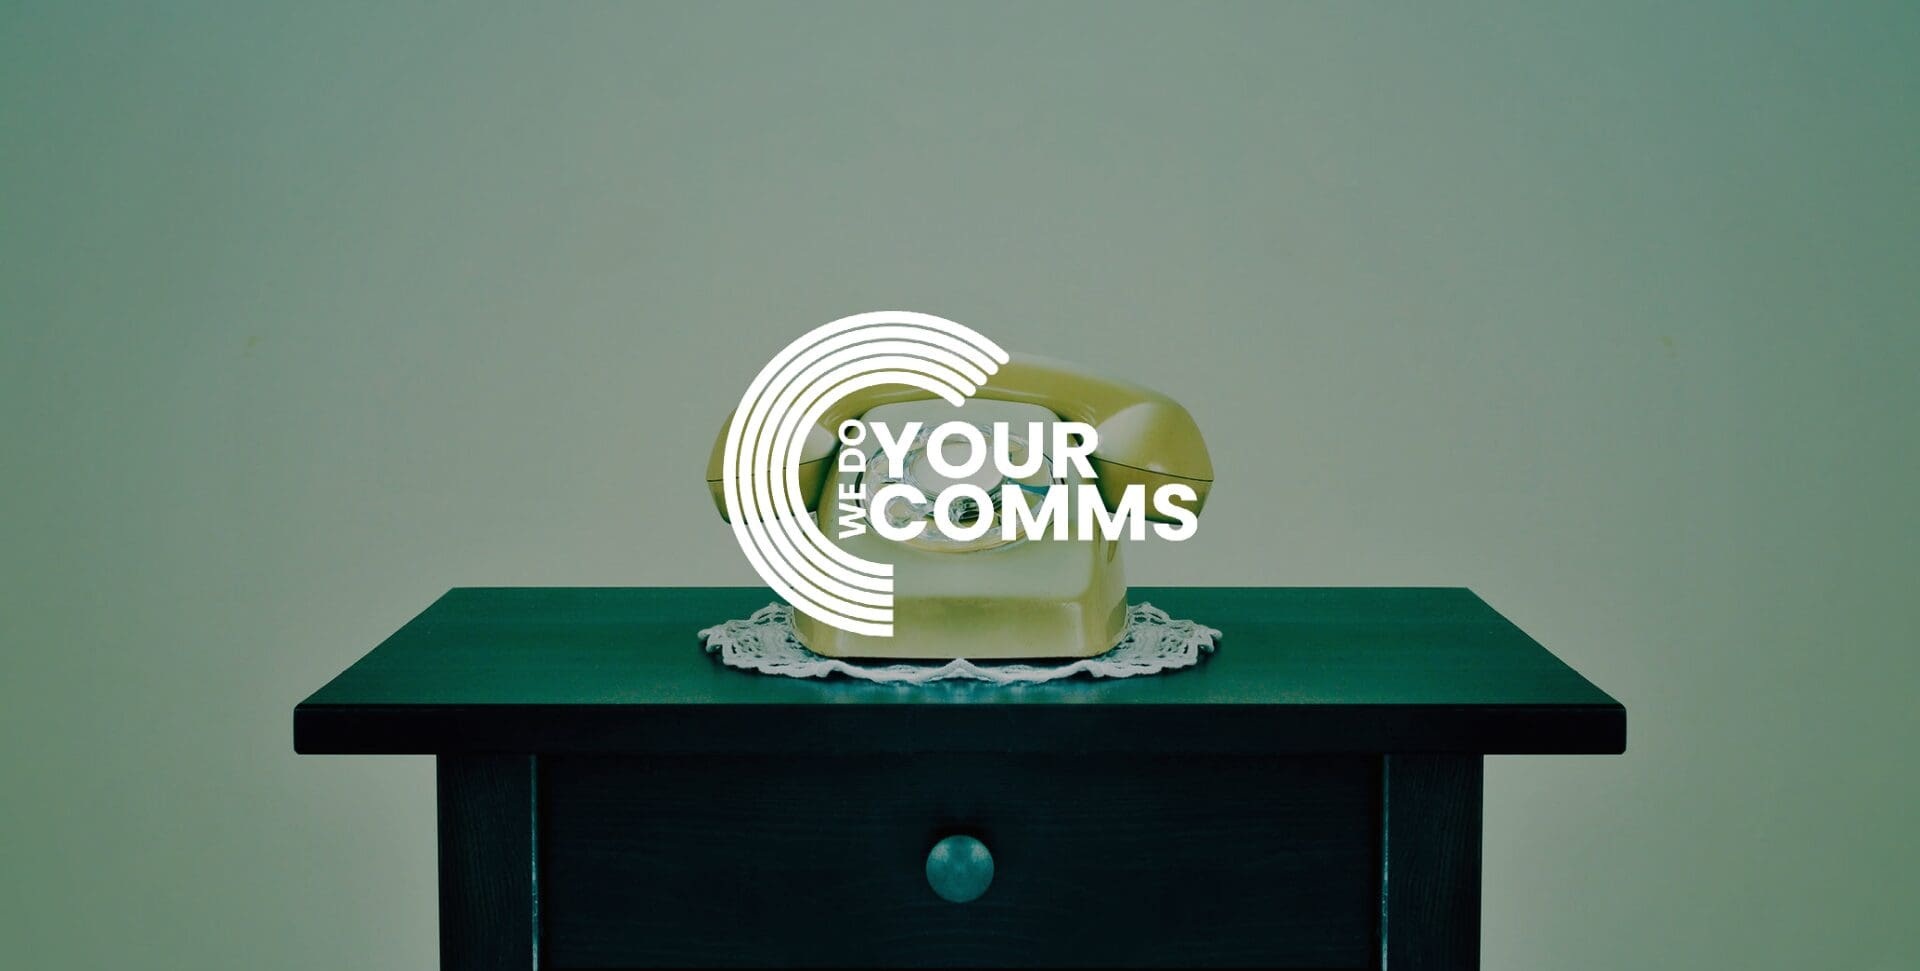 WeDoYourComms white logo on background of green olds style telephone placed on green side table